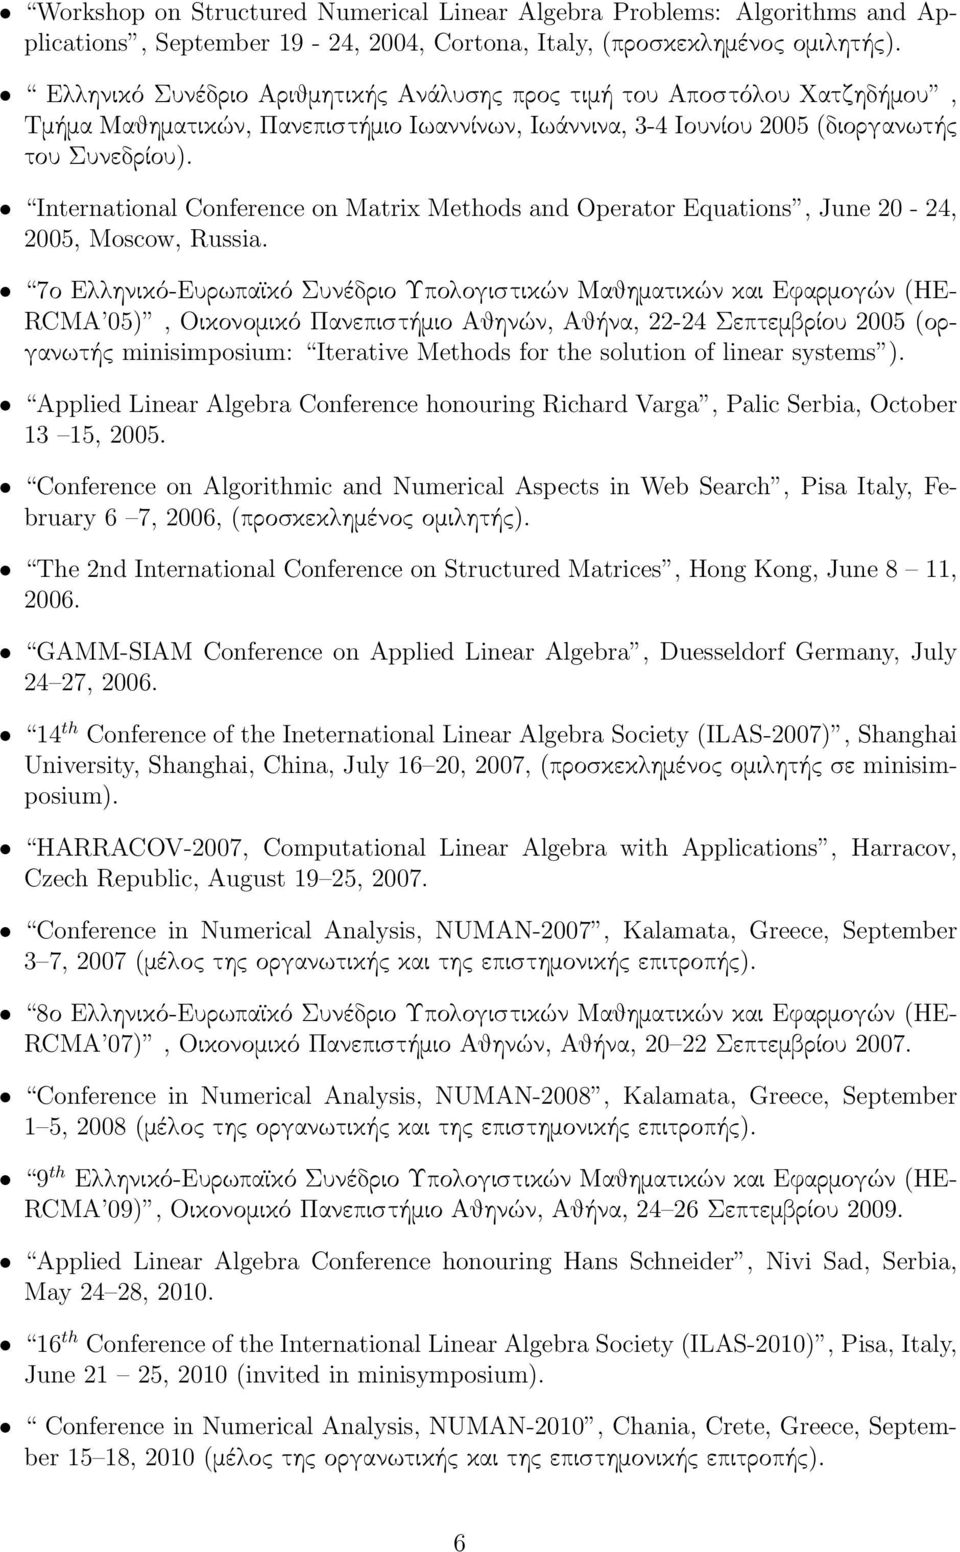 International Conference on Matrix Methods and Operator Equations, June 20-24, 2005, Moscow, Russia.